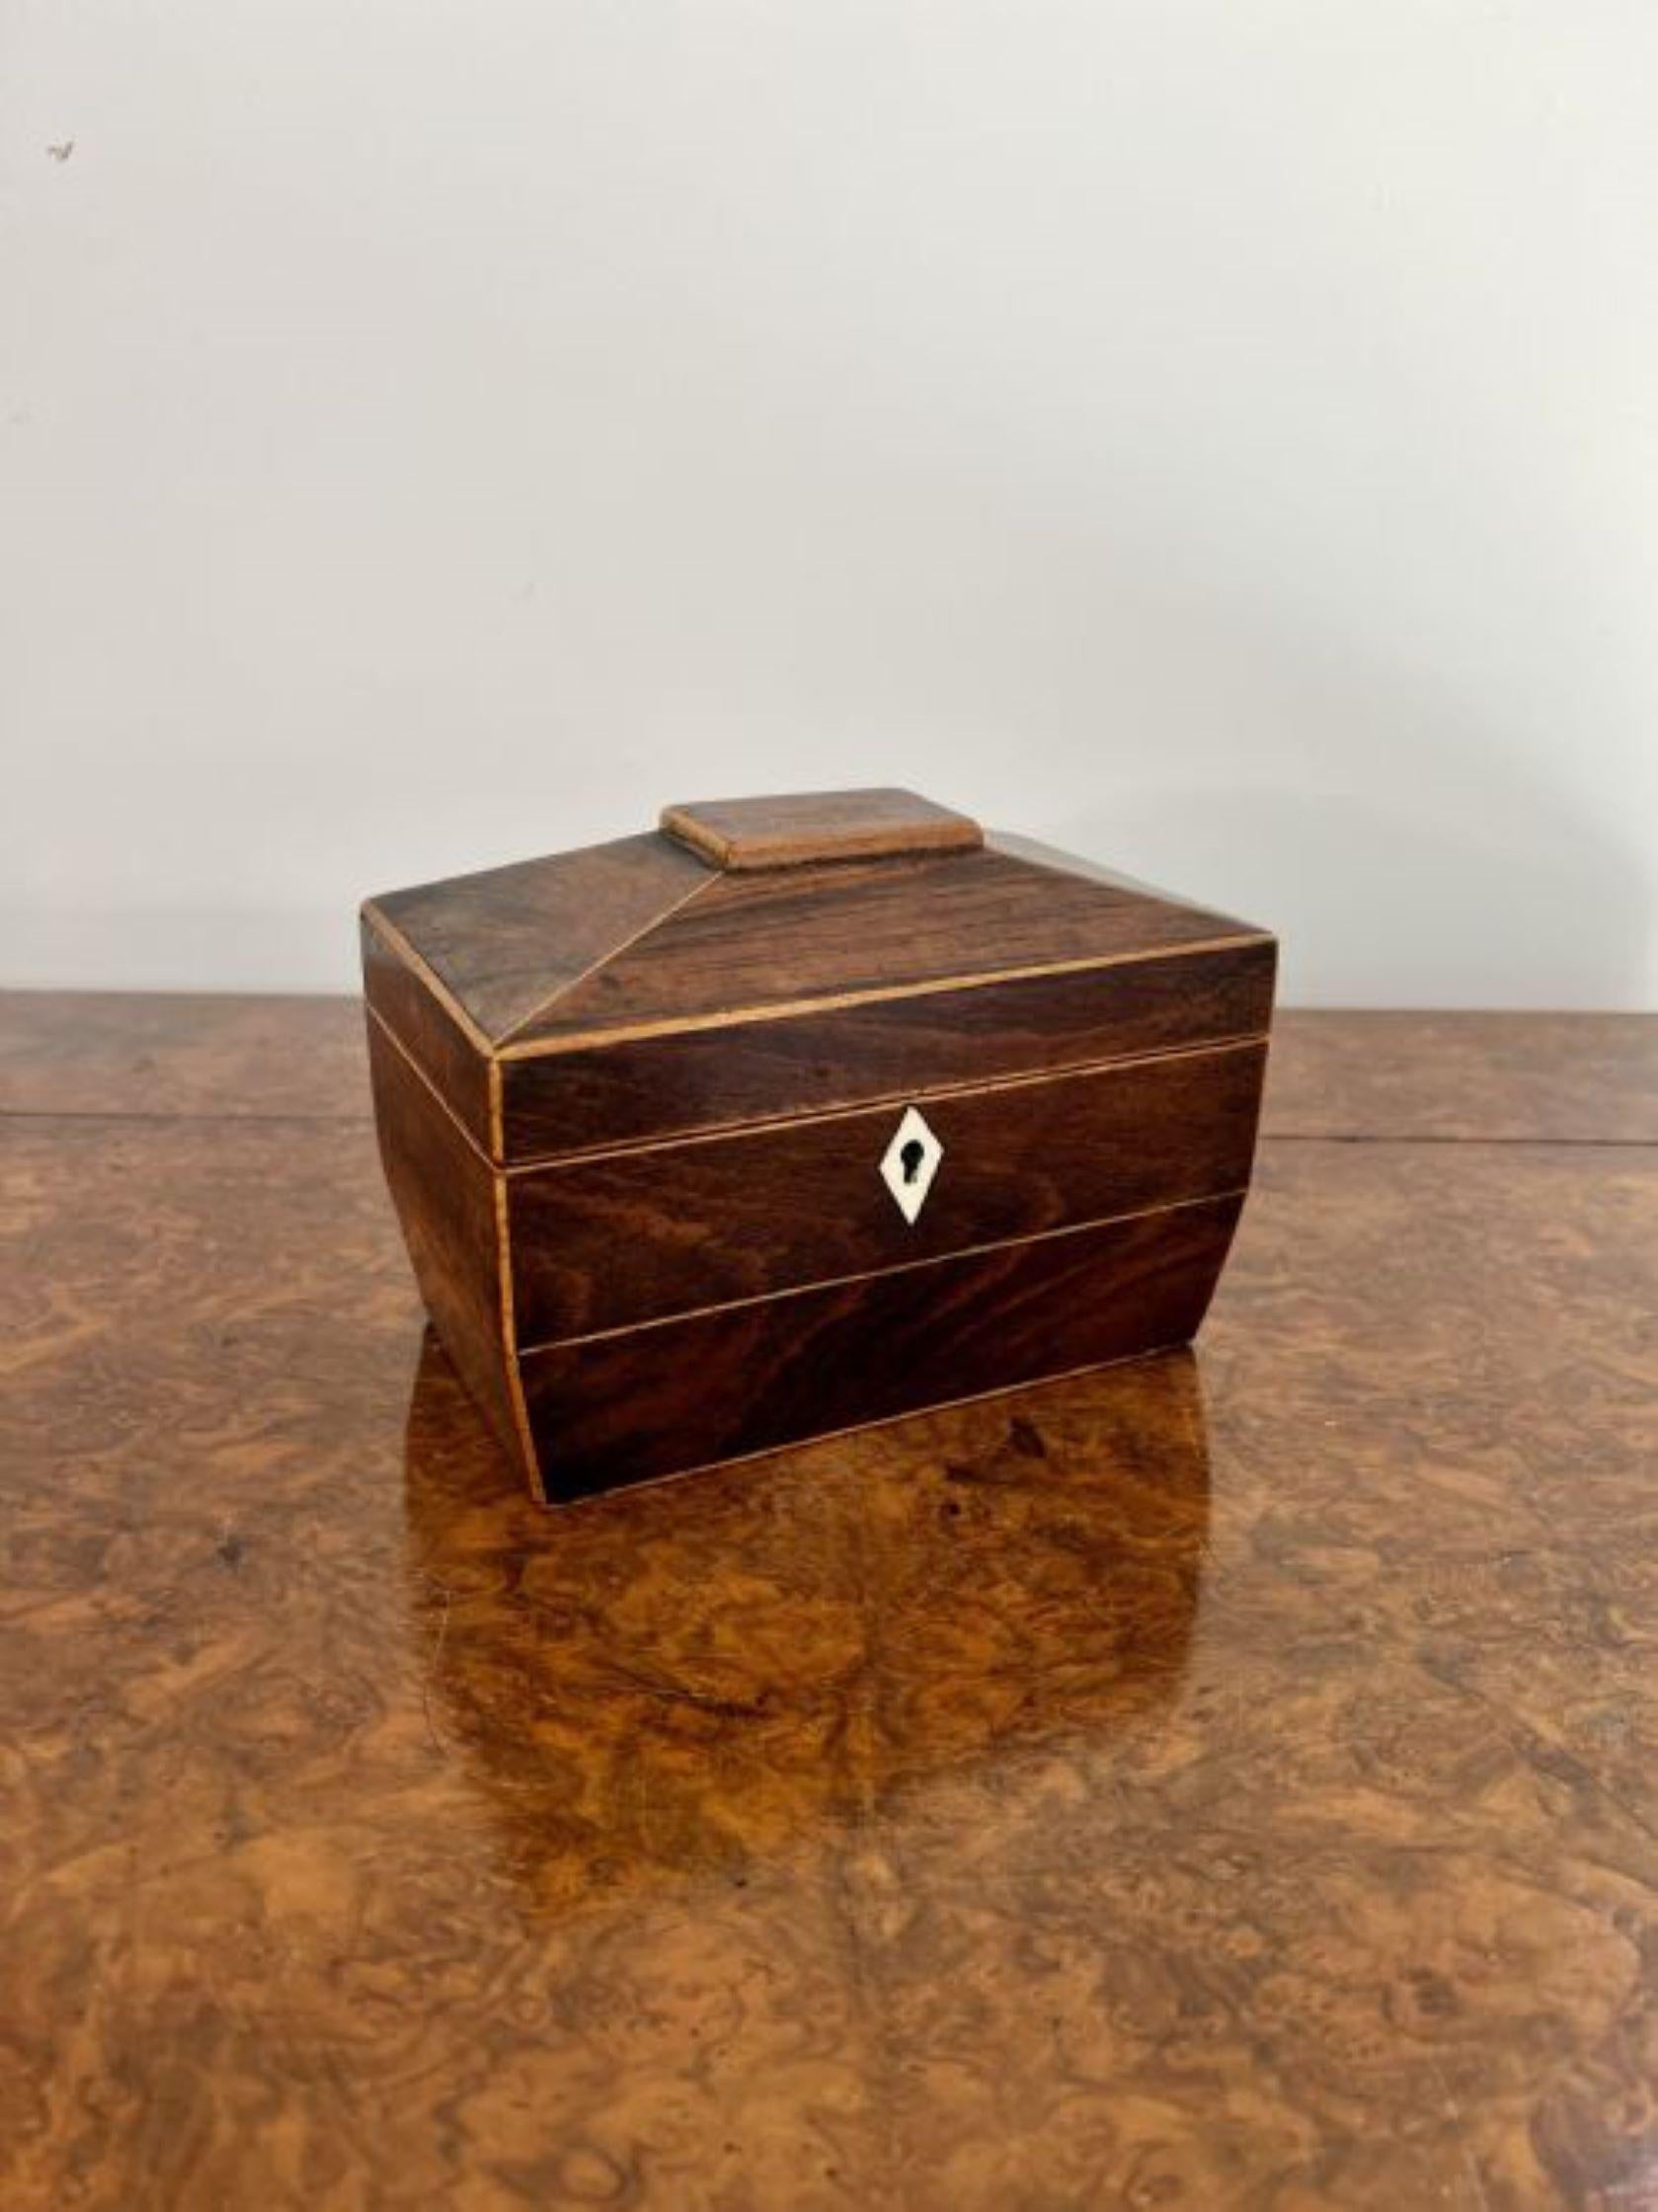 Quality antique George III mahogany tea caddy having a quality antique George III mahogany tea caddy with satinwood stringing inlay, with a lift up lid opening to reveal two lidded receptacles for tea. 